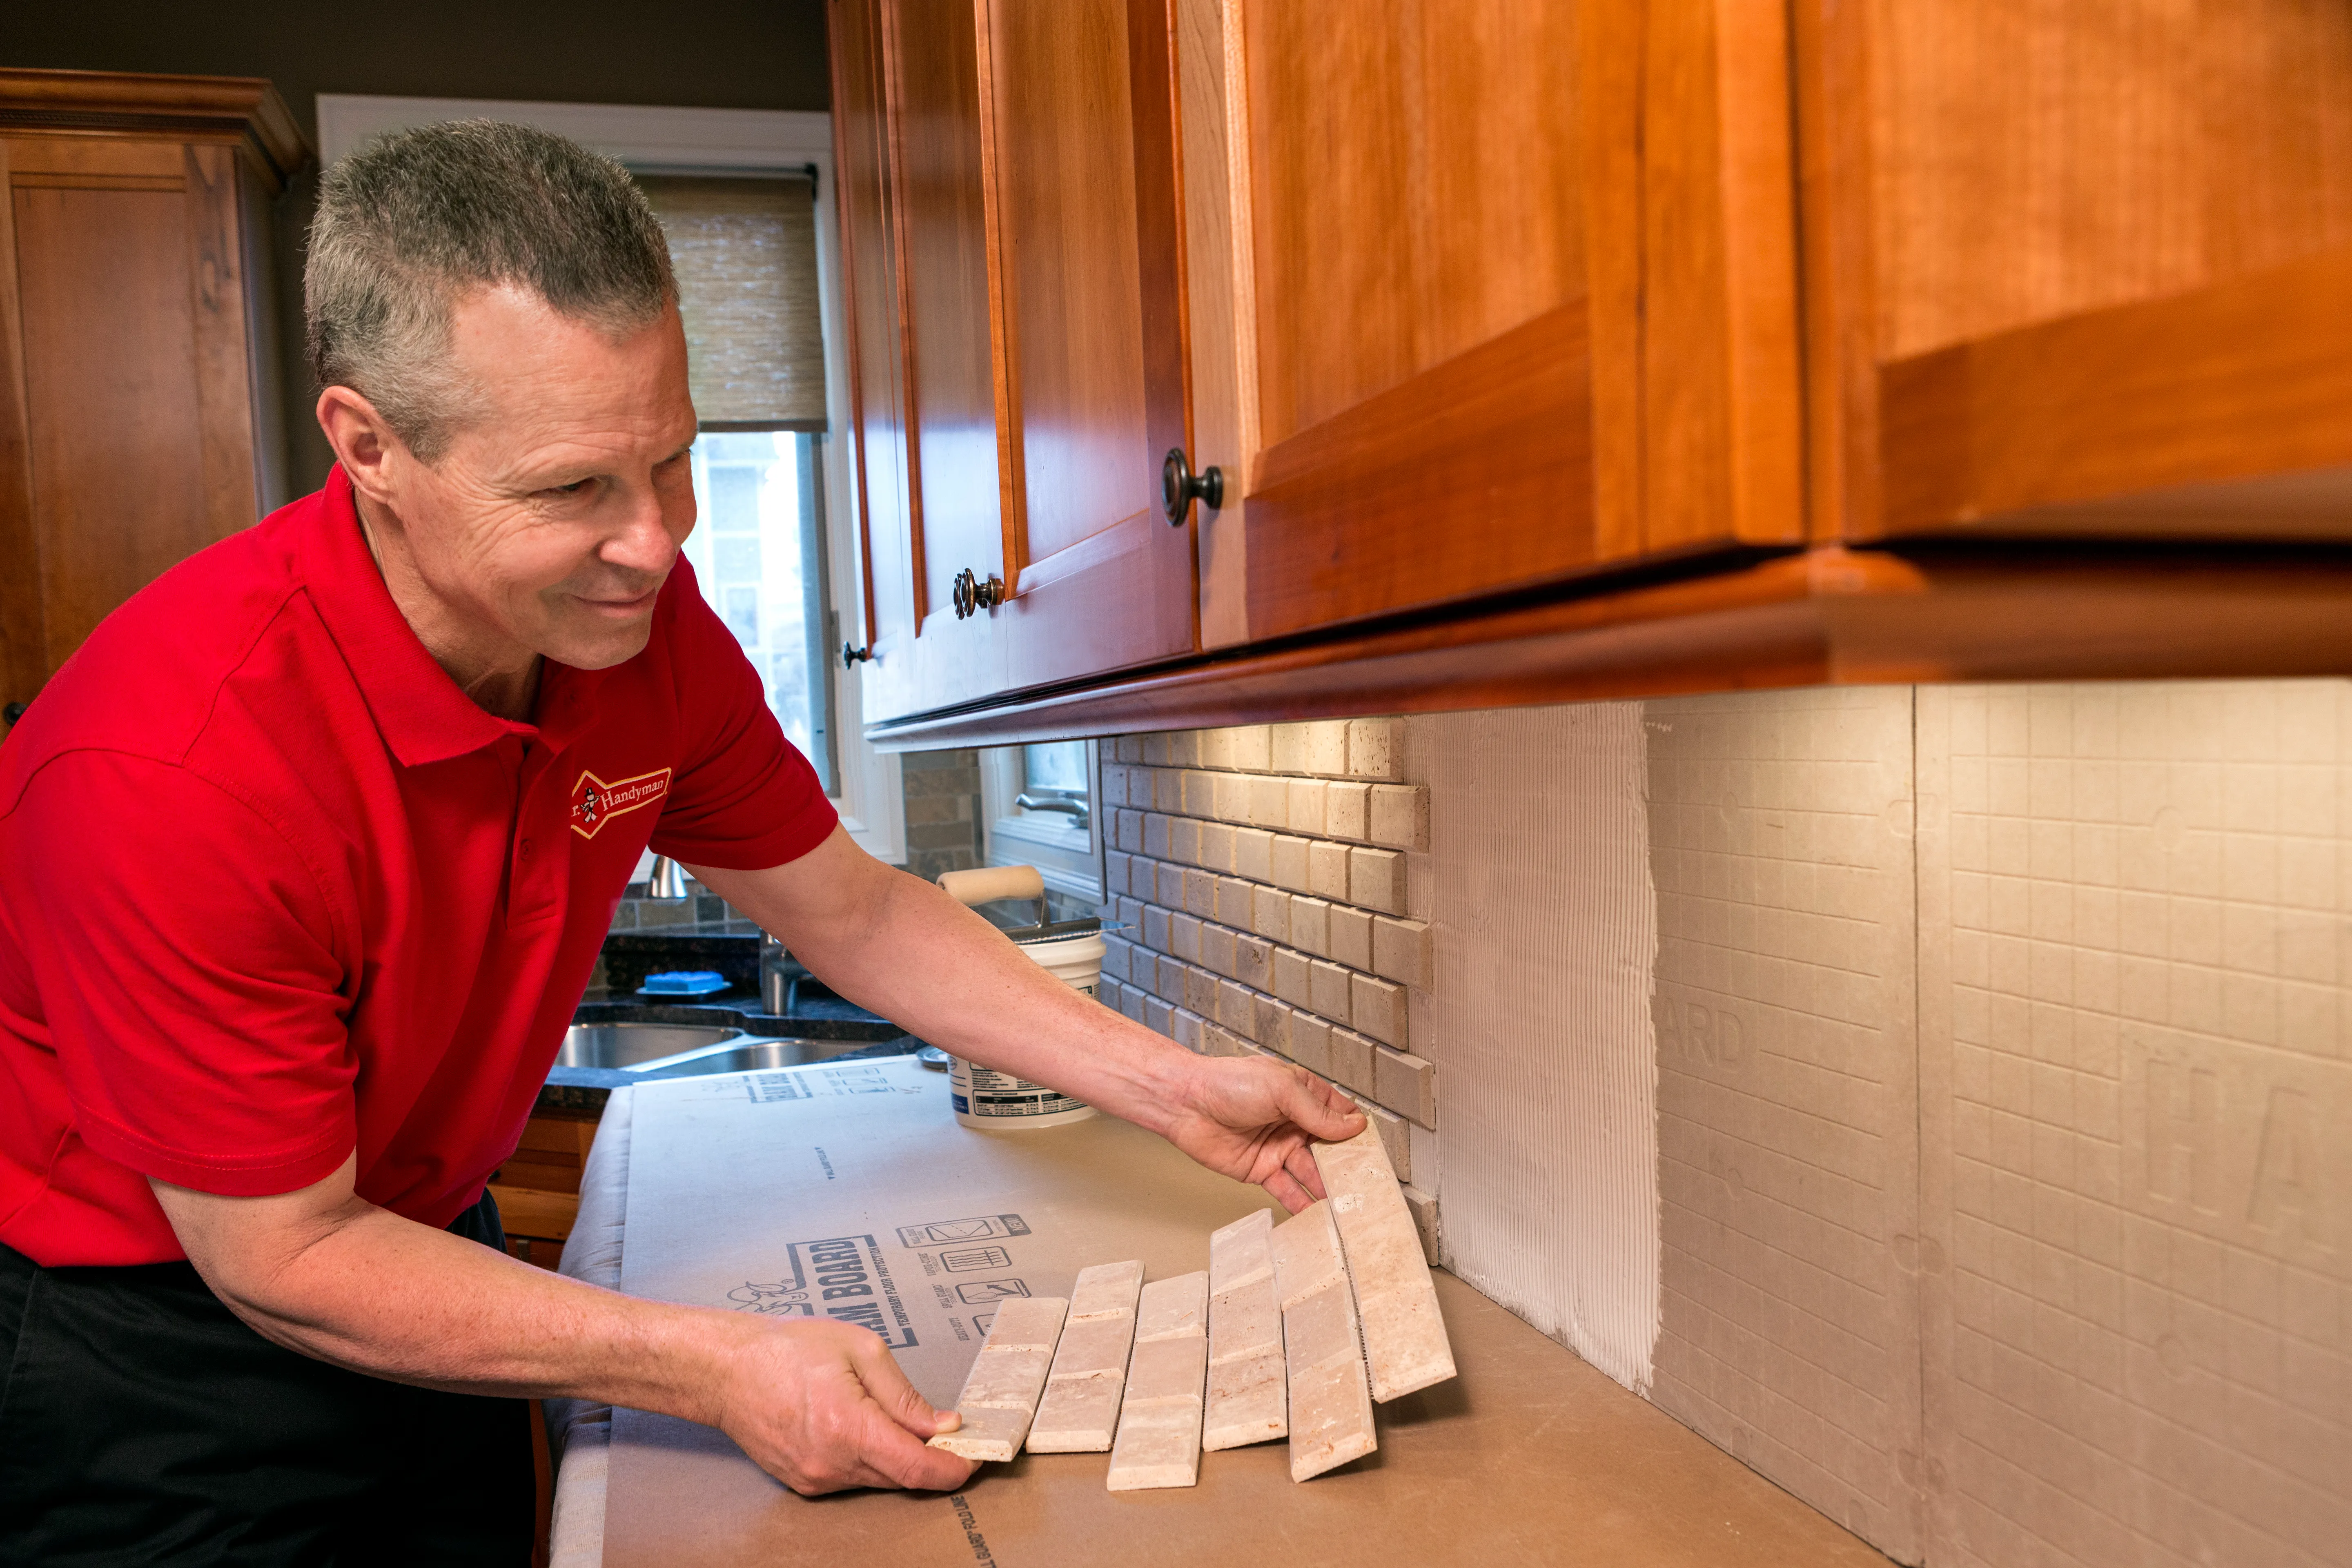 A handyman from Mr. Handyman installing a kitchen backsplash by mounting large sections of tile.